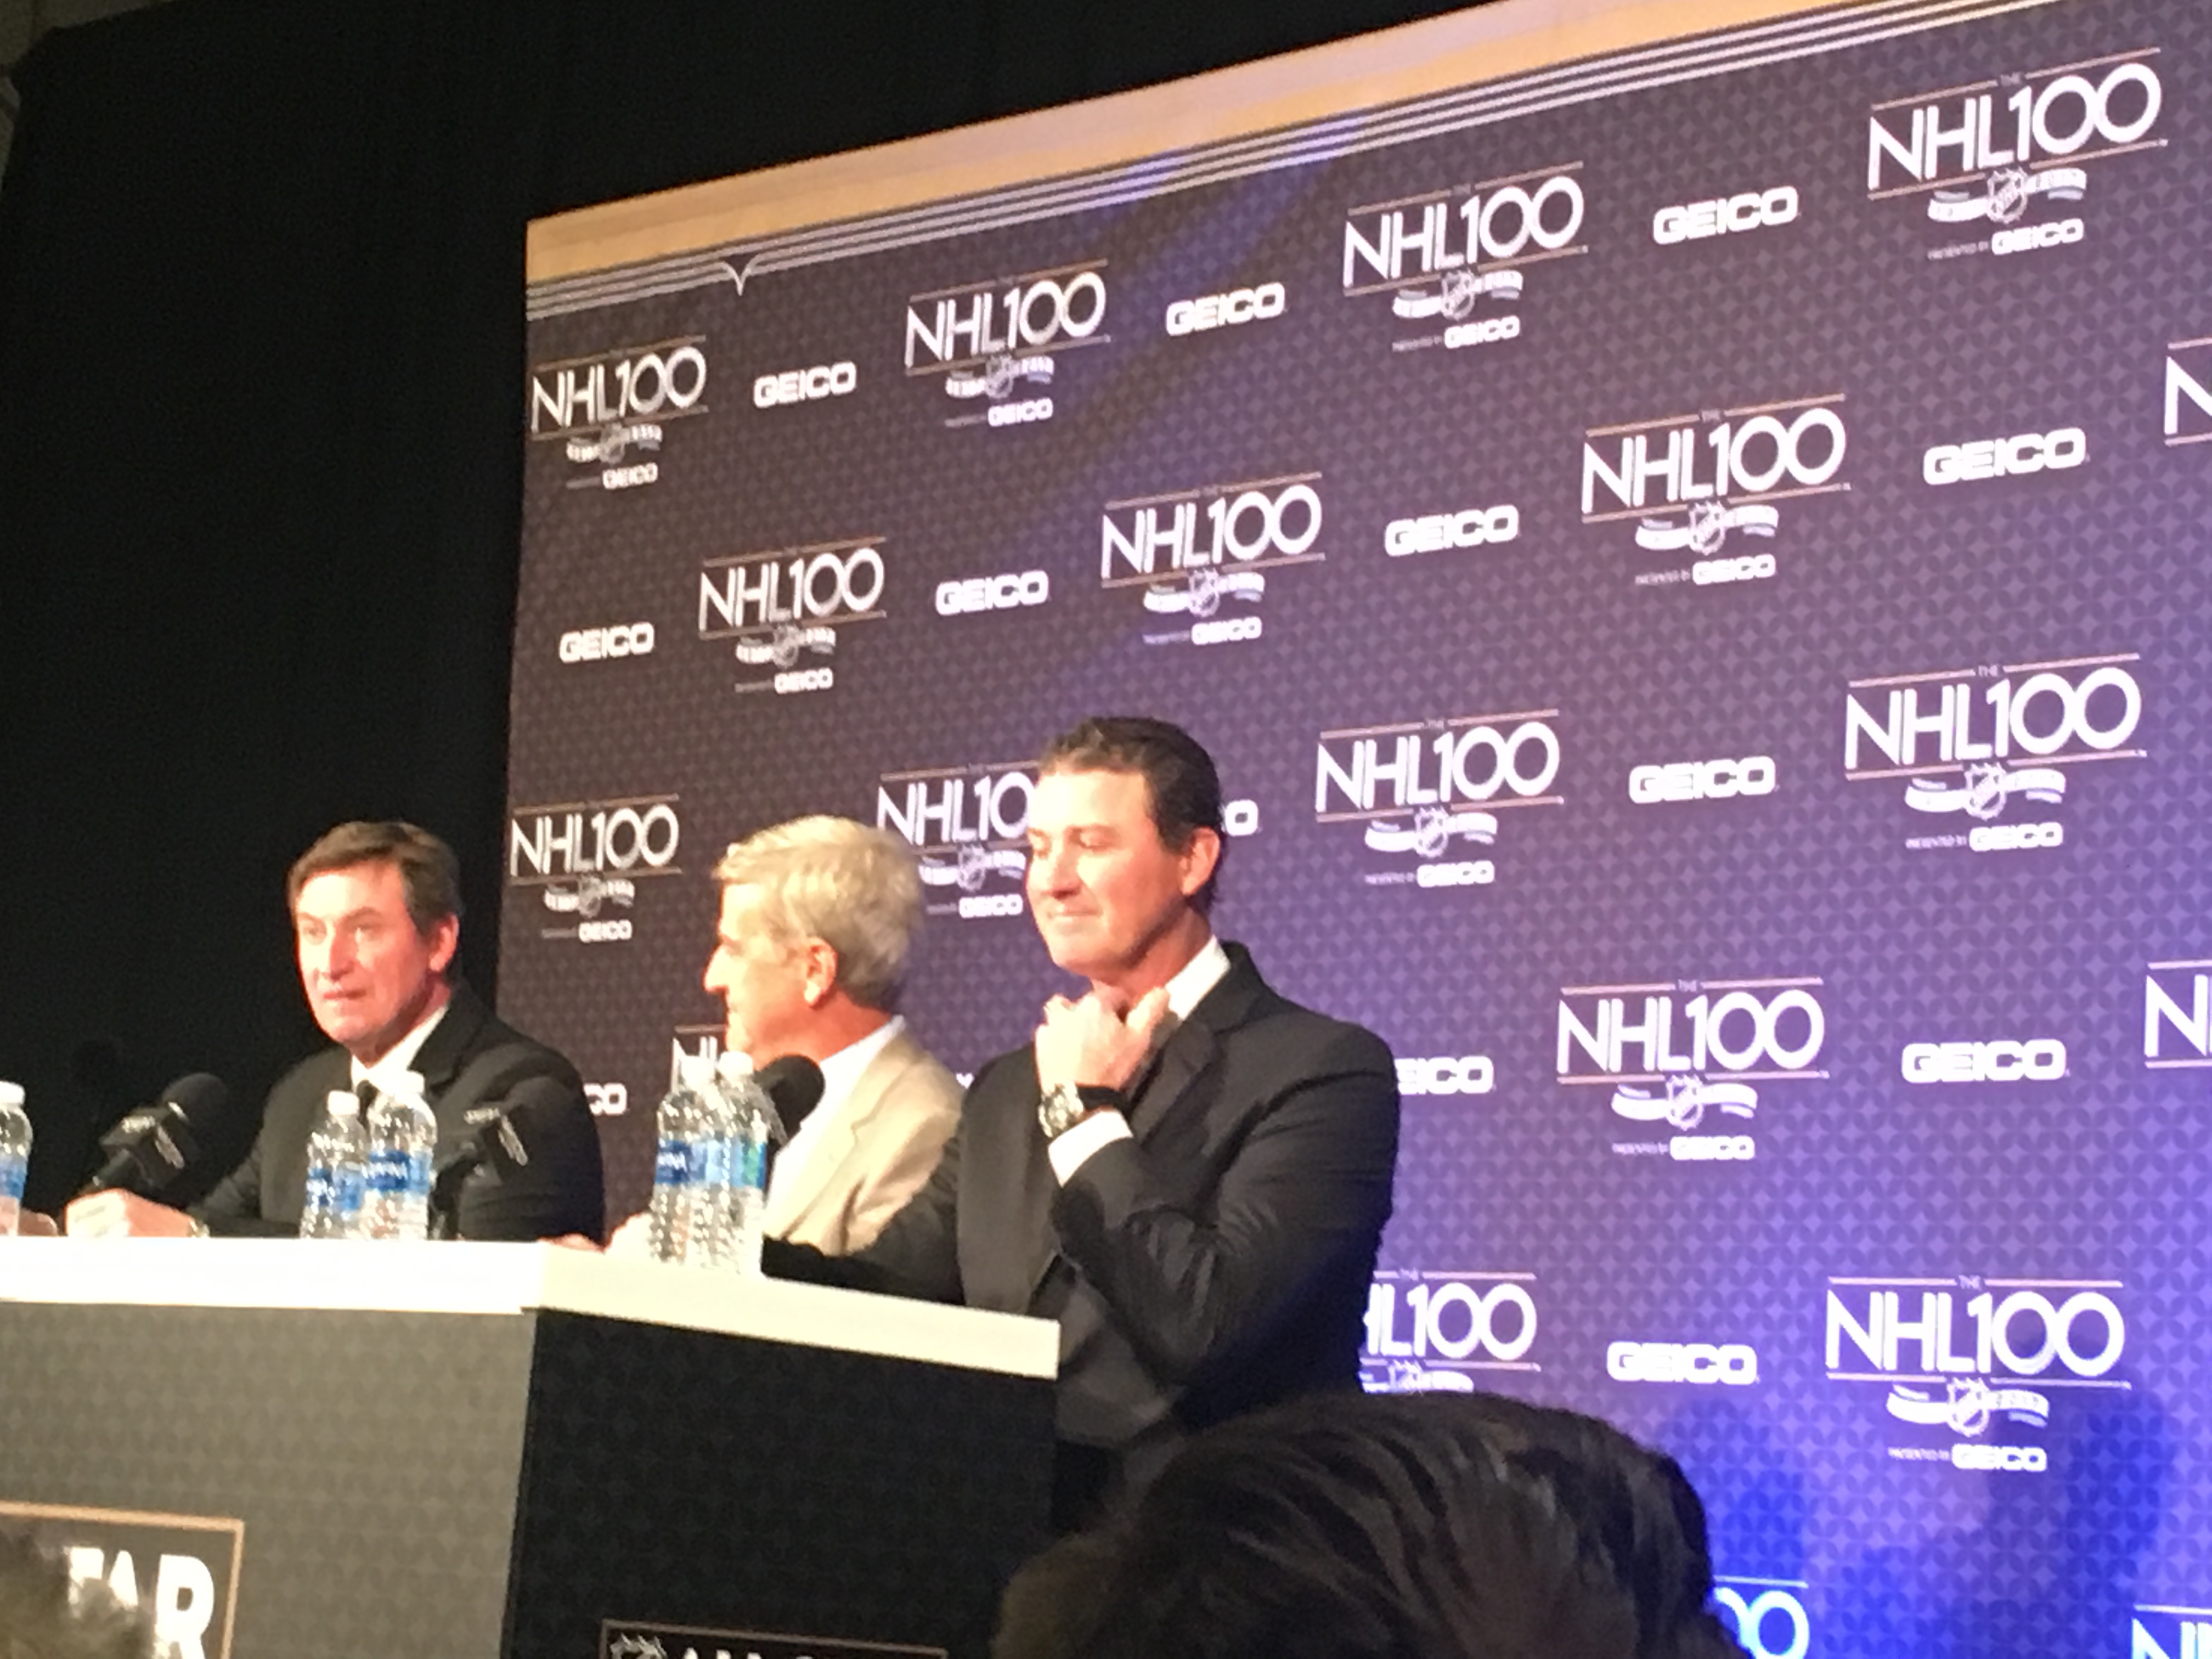 Wayne Gretzky Interview Ahead of the NHL 100 Gala at All-Star Weekend